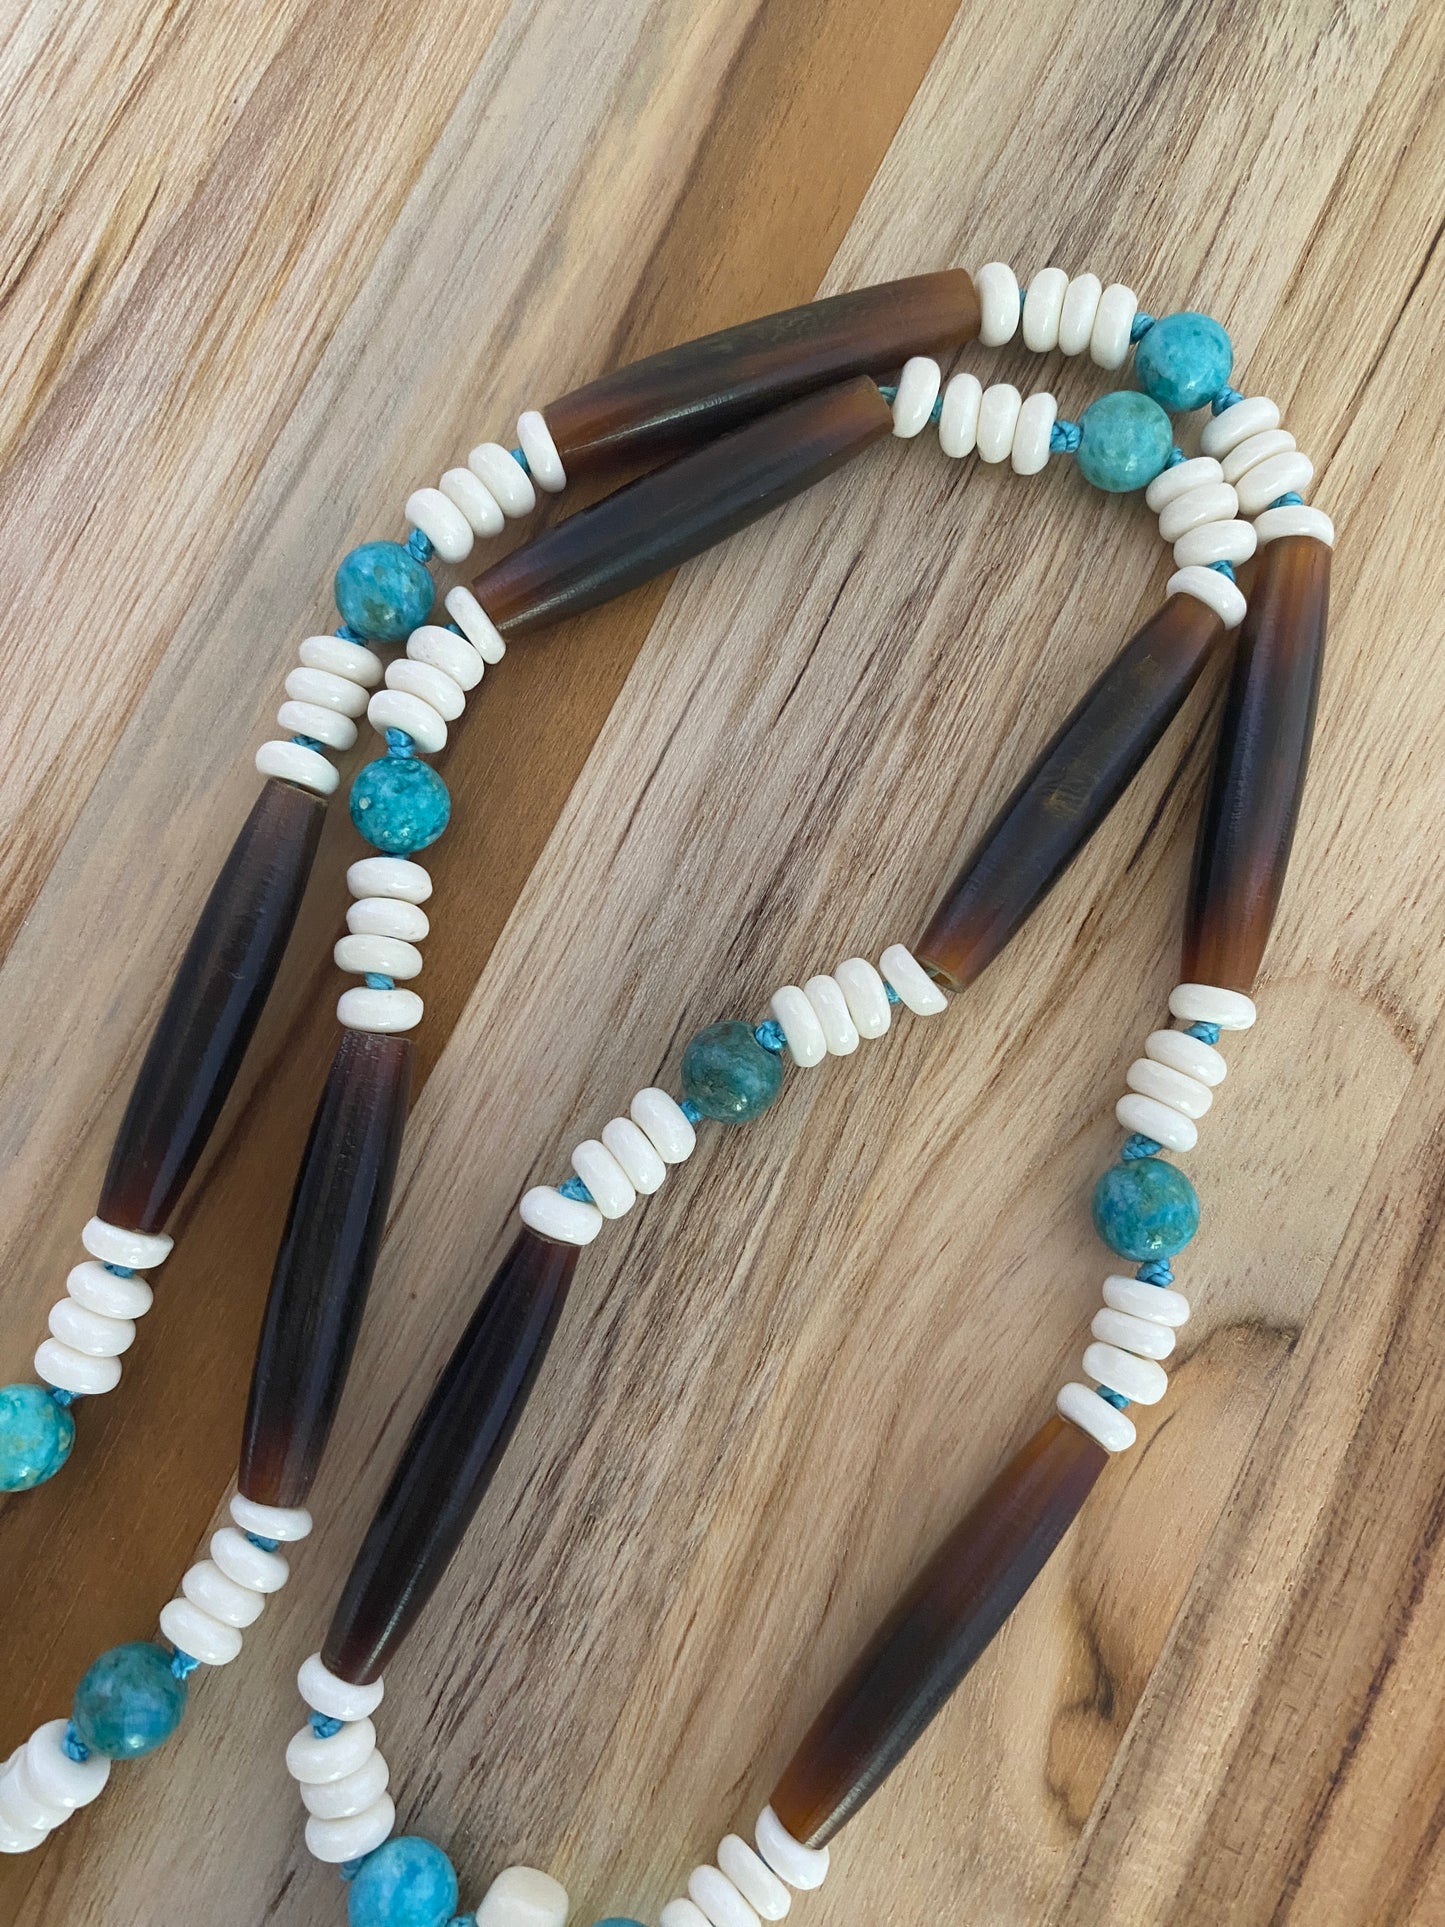 28" Long Feather Necklace with Brown & Turquoise Beads